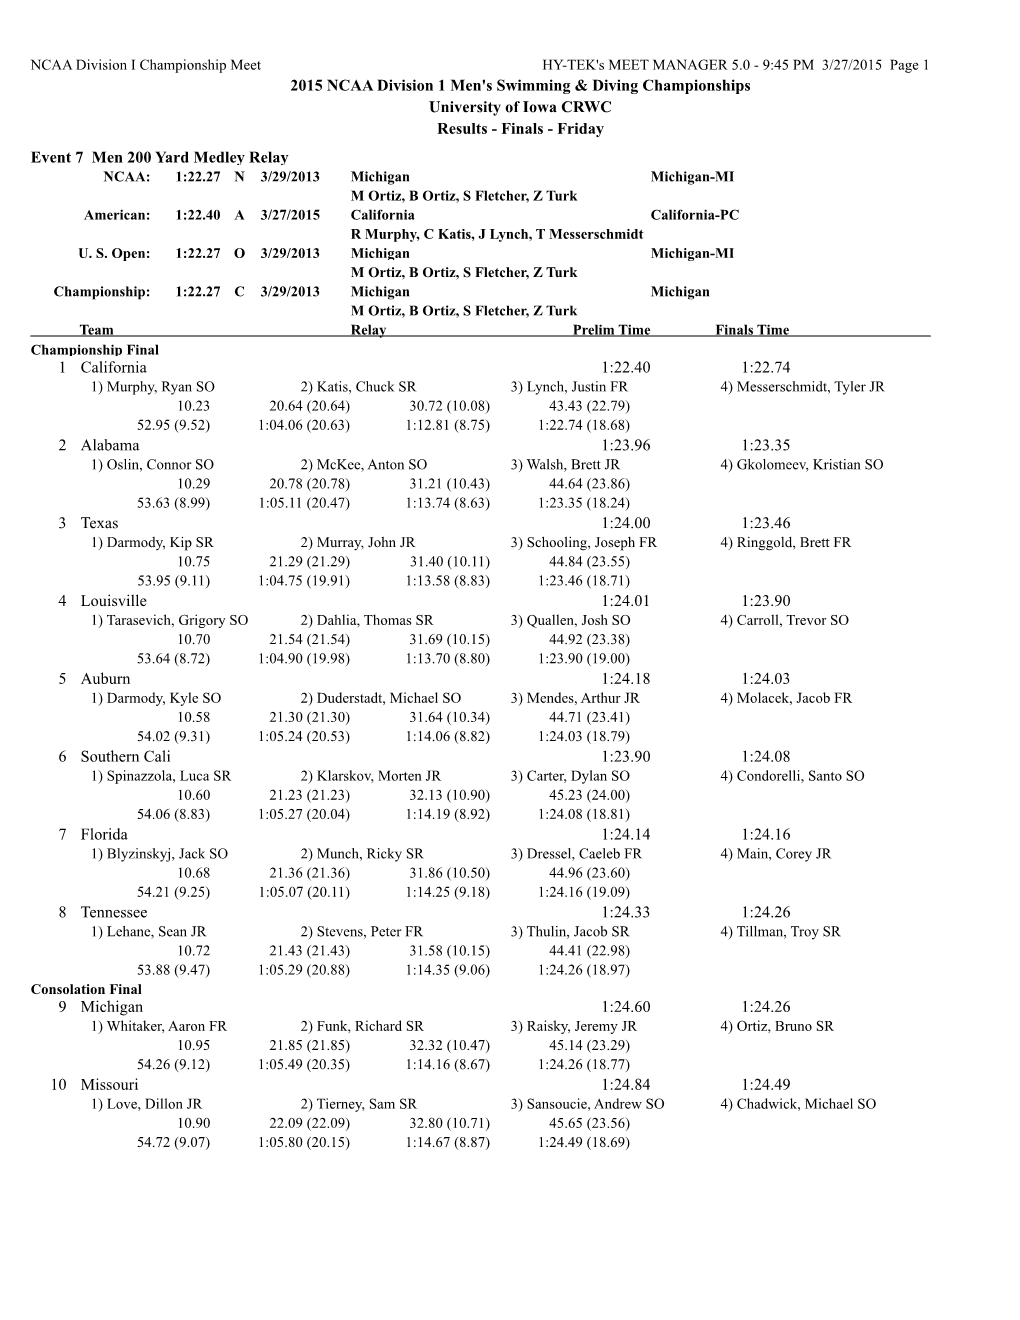 2015 NCAA Division 1 Men's Swimming & Diving Championships